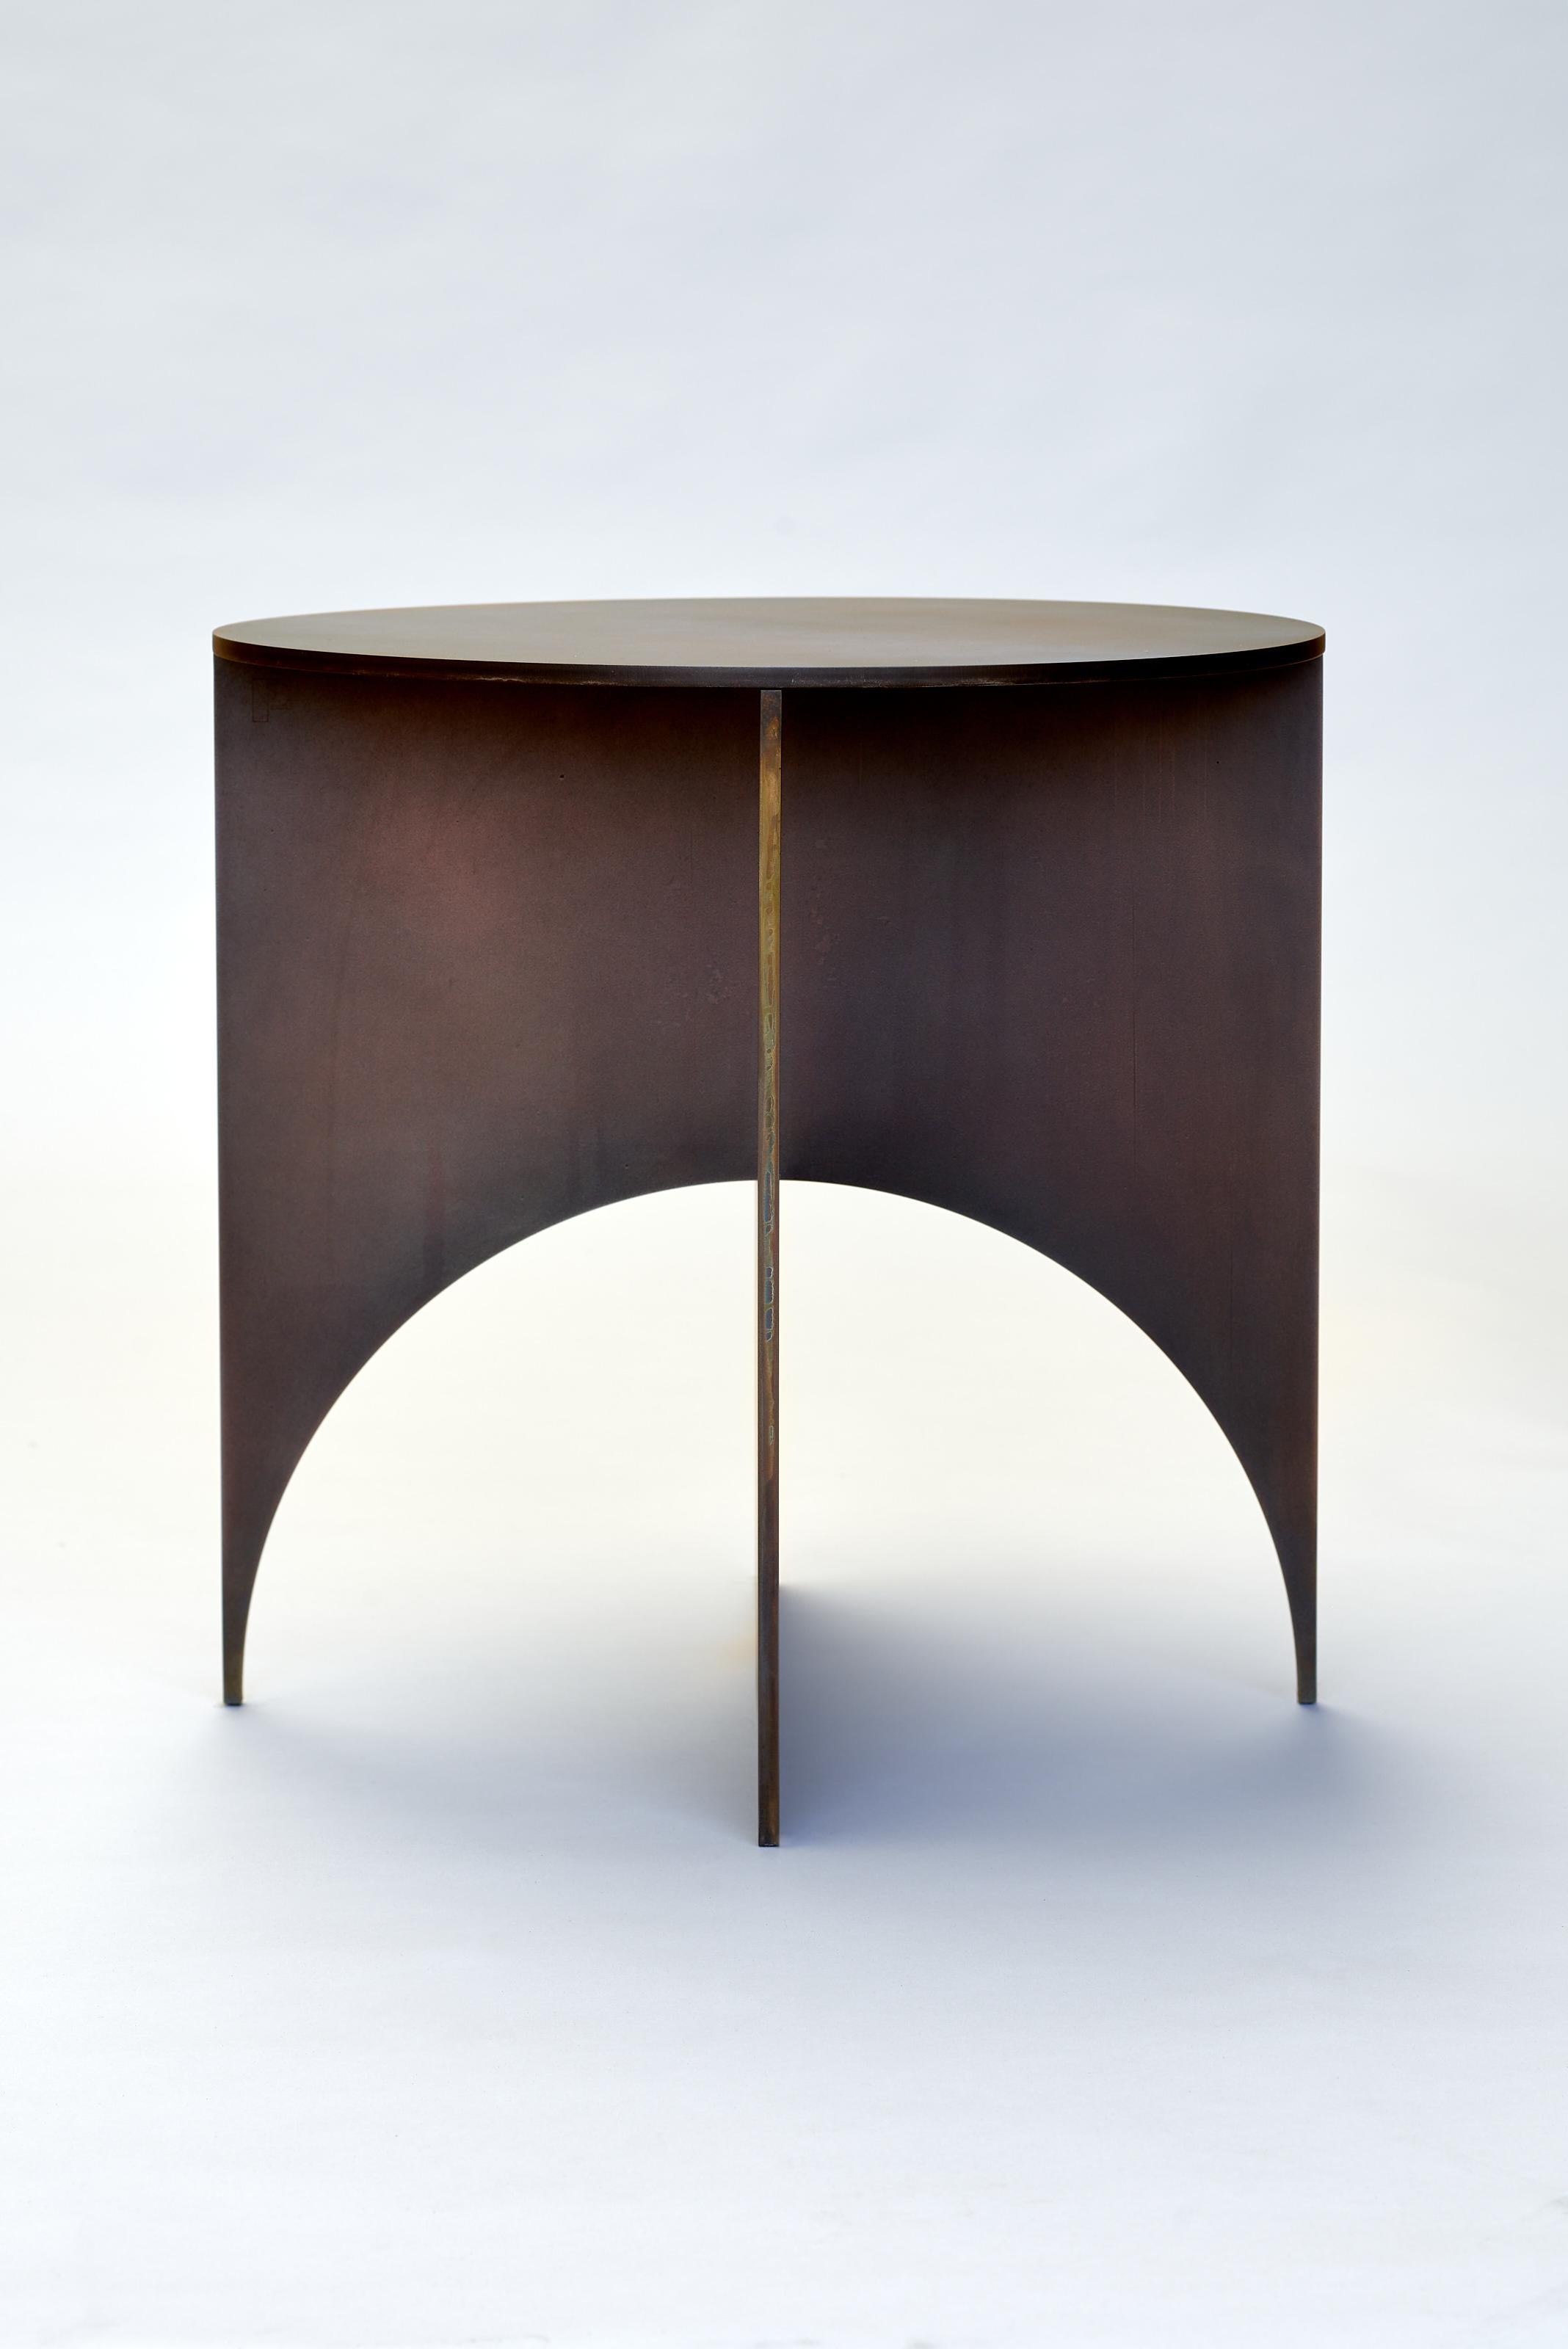 'Iris' Steel Table with Black Copper patina, by Frank Penders In New Condition For Sale In Amsterdam, NL